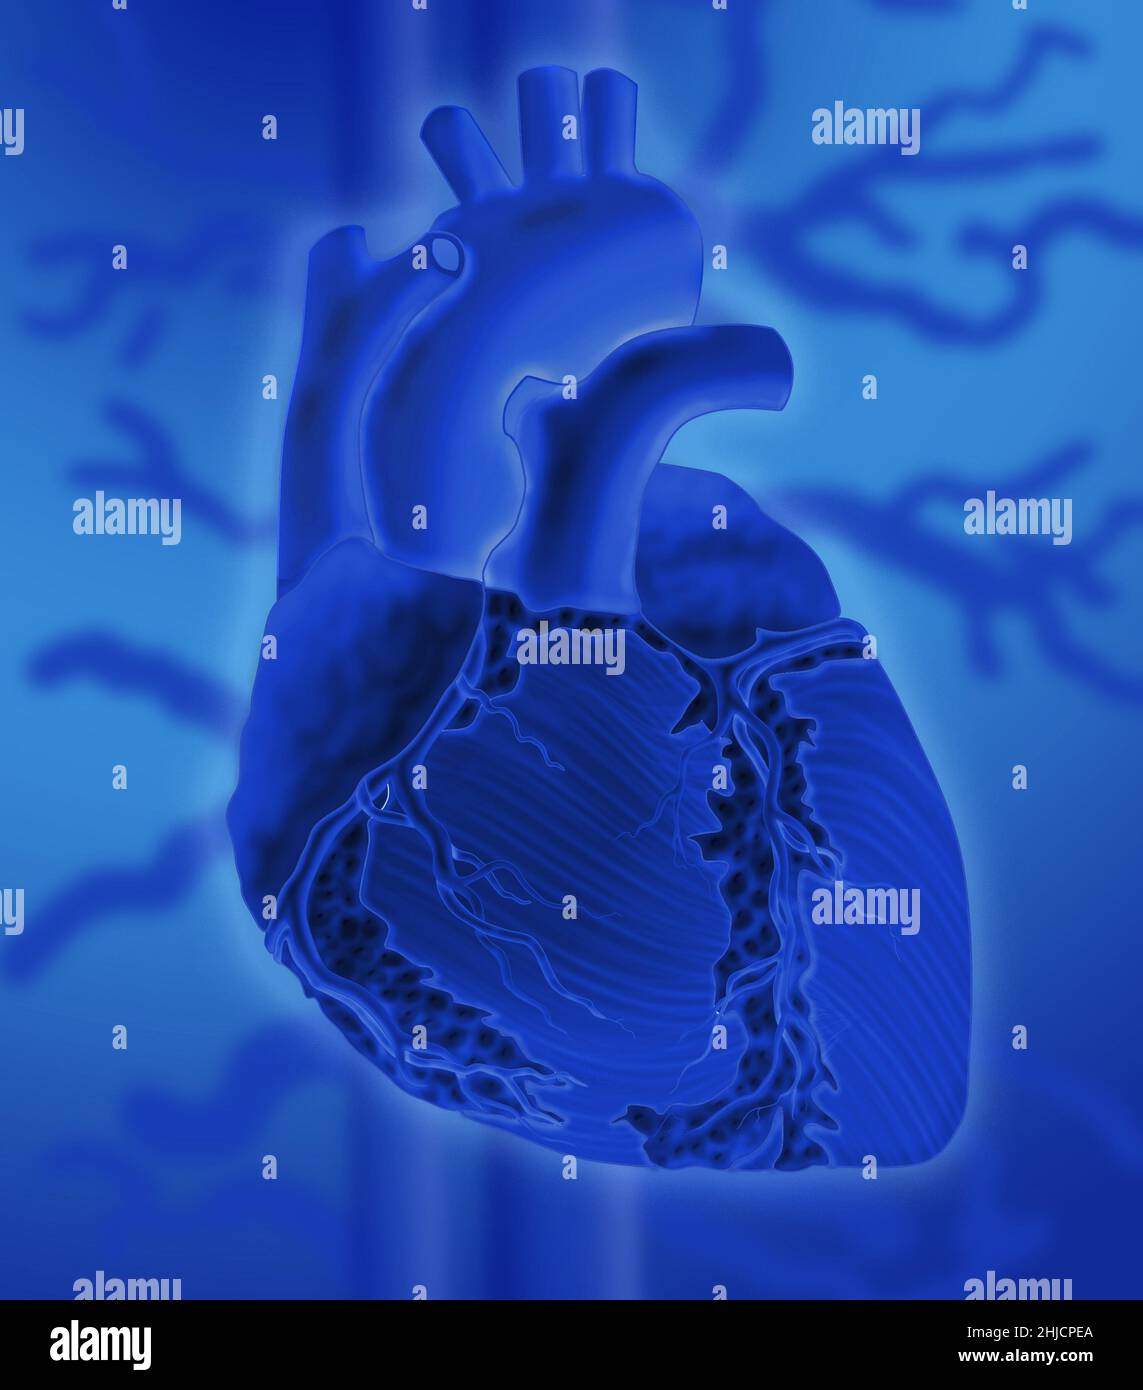 Conceptual image of the human  heart on a colorful background. Stock Photo